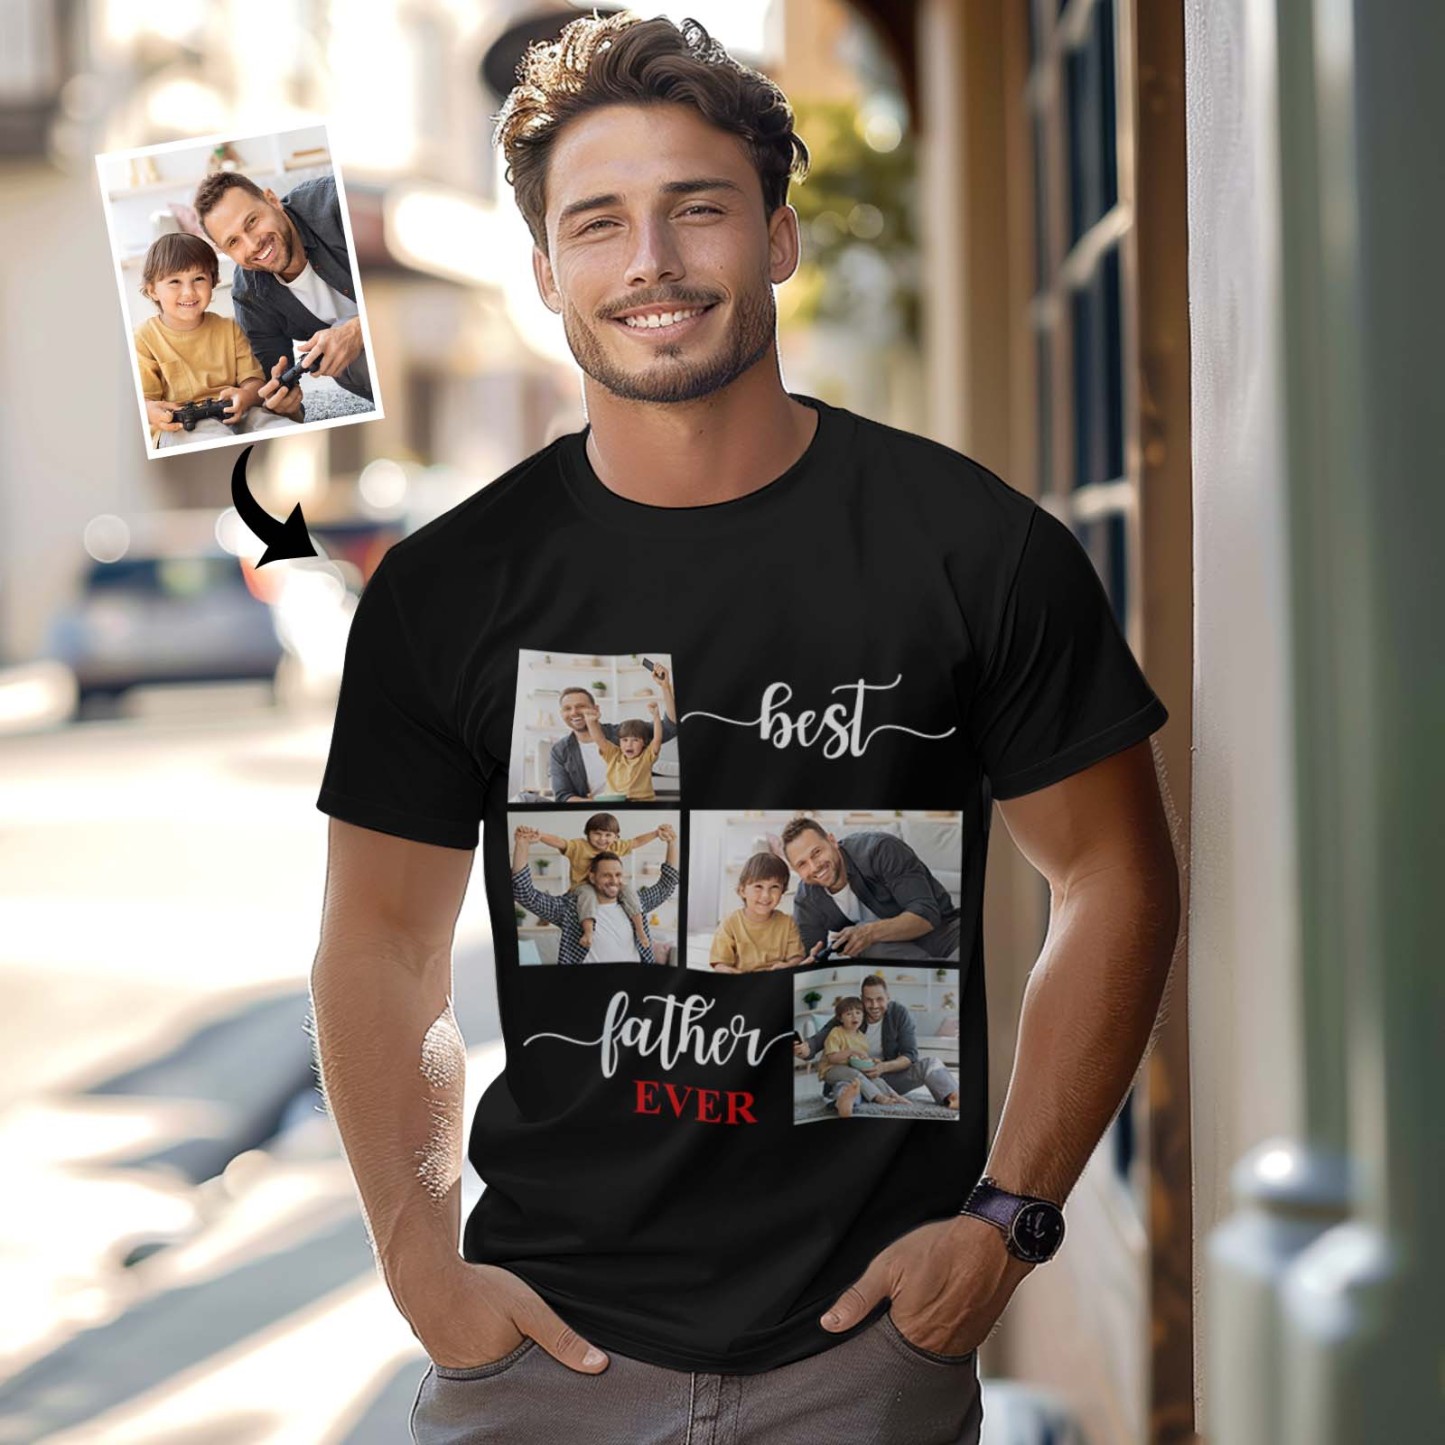 custom-t-shirt-personalized-photo-t-shirt-best-father-ever-fathers-day-gift-family-t-shirt